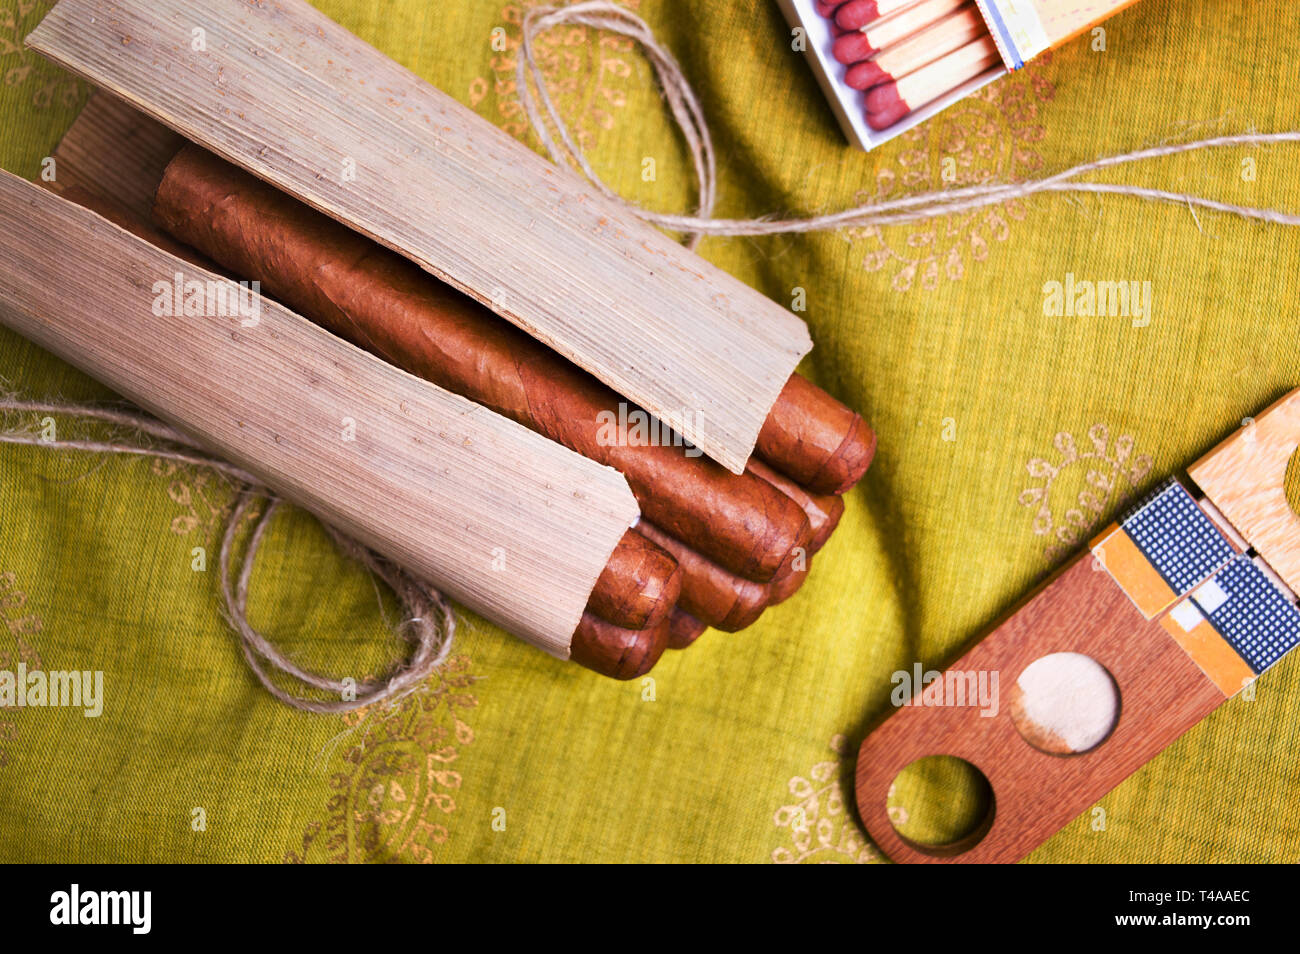 Bunch of Cuban cigars and accessories on a table Stock Photo